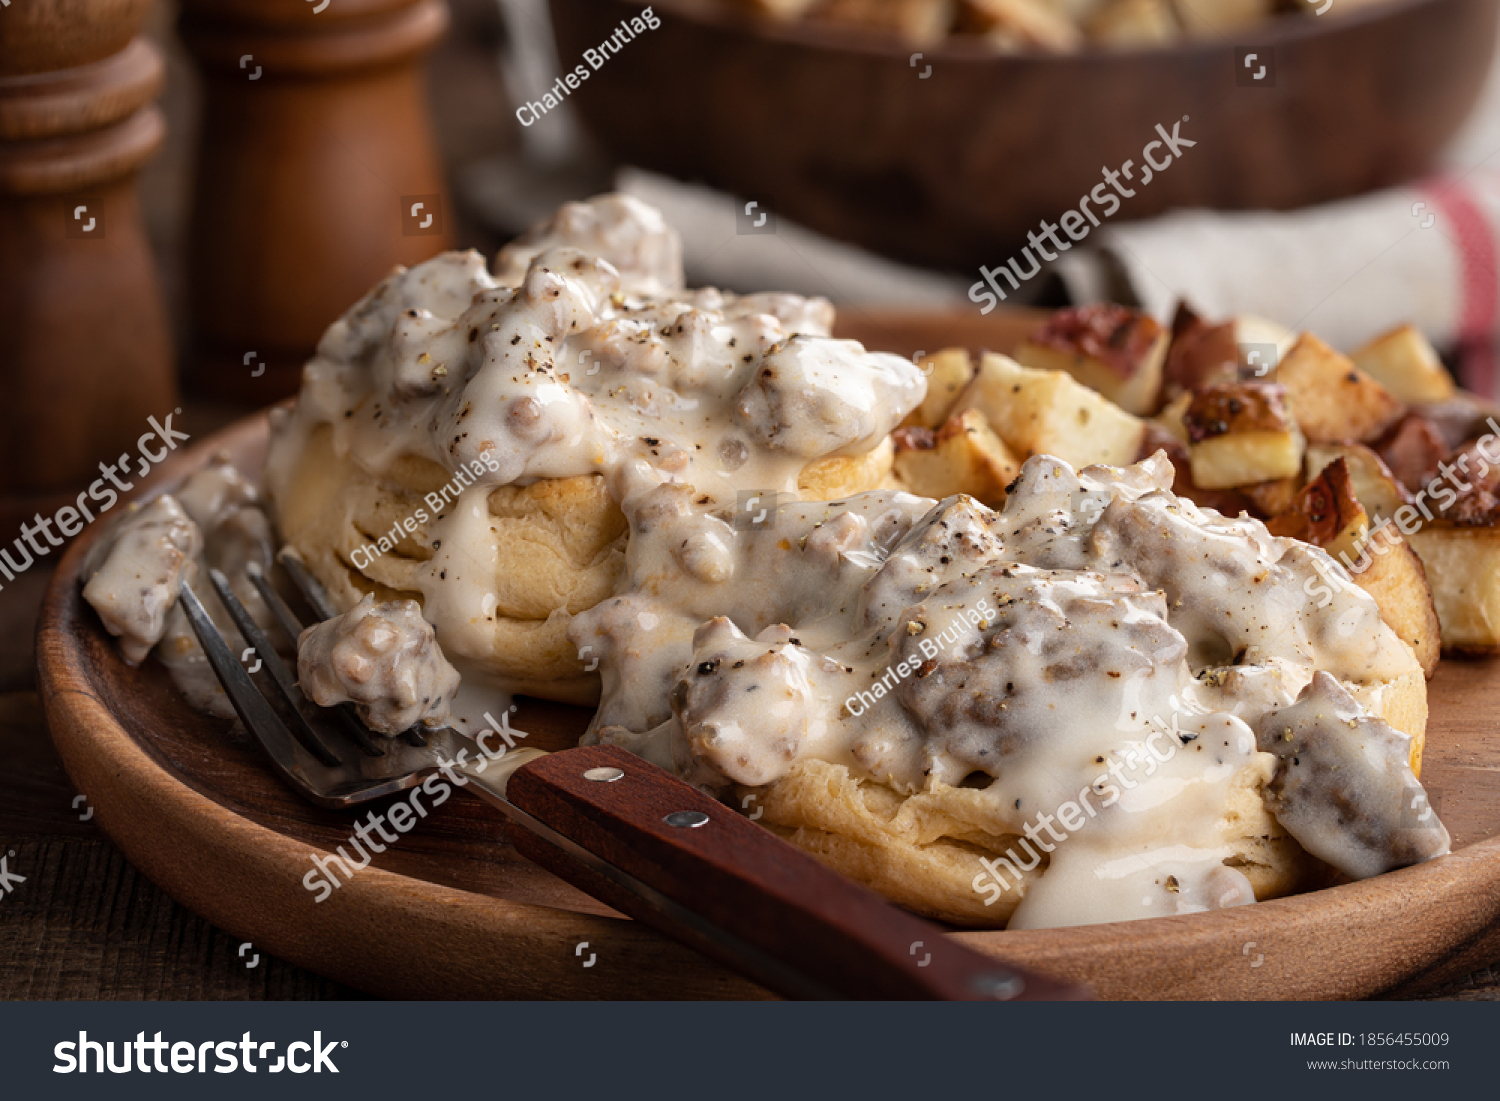 Closeup of biscuits with creamy sausage gravy and fried potatoes on a wooden plate #1856455009